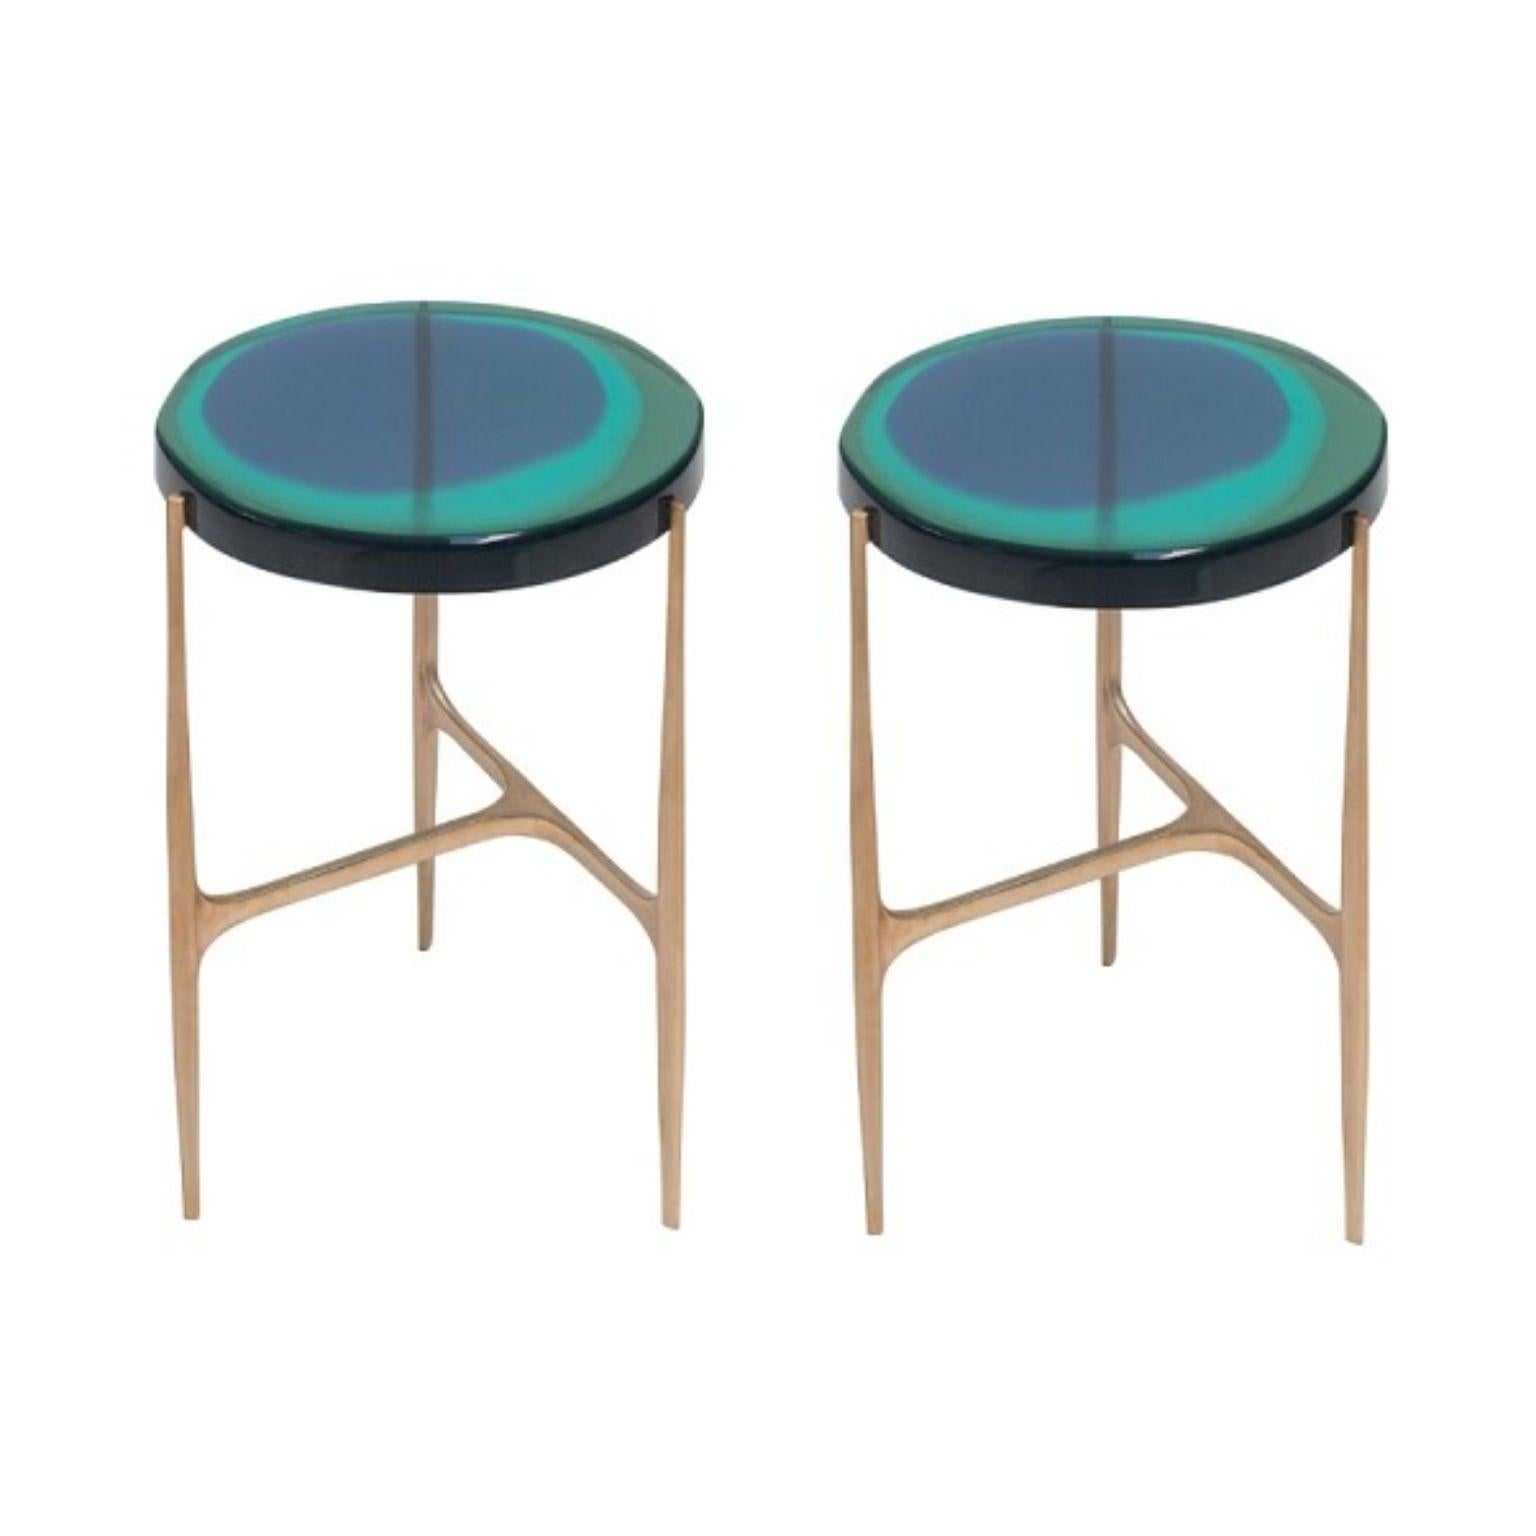 Set of 2 Agatha coffee tables by Draga & Aurel.
Dimensions: W 34 x D 34 x H 50.
 top Ø 34 cm.
Materials: resin, bronze.

The Agatha coffee tables are featured by irregular circular tops of transparent and
colorful resin sit on a bronze frame